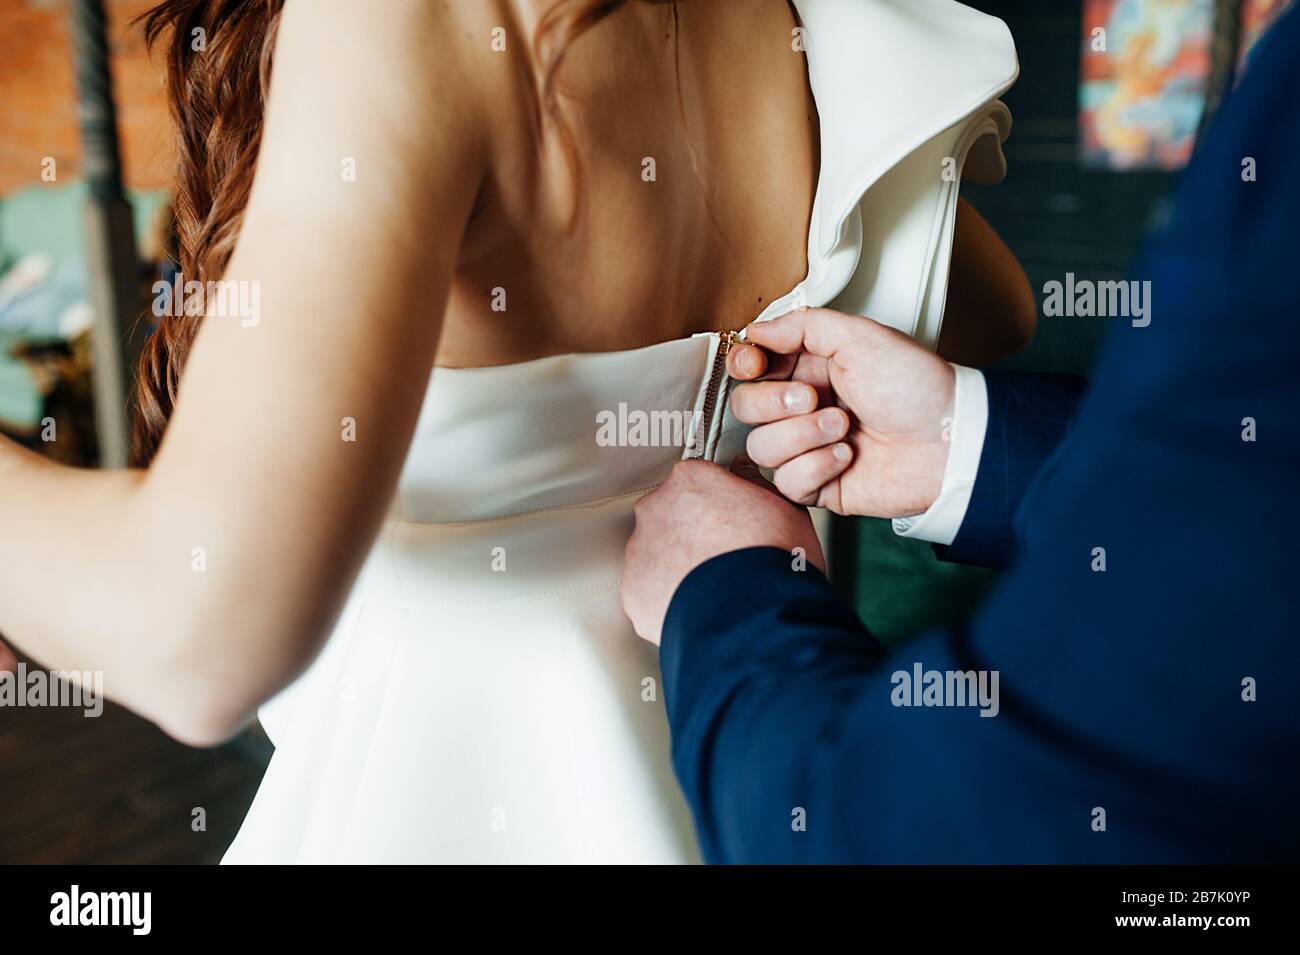 Men's rough hands in a blue suit fasten the gold zipper of a white dress on a woman's elegant back. no faces Stock Photo